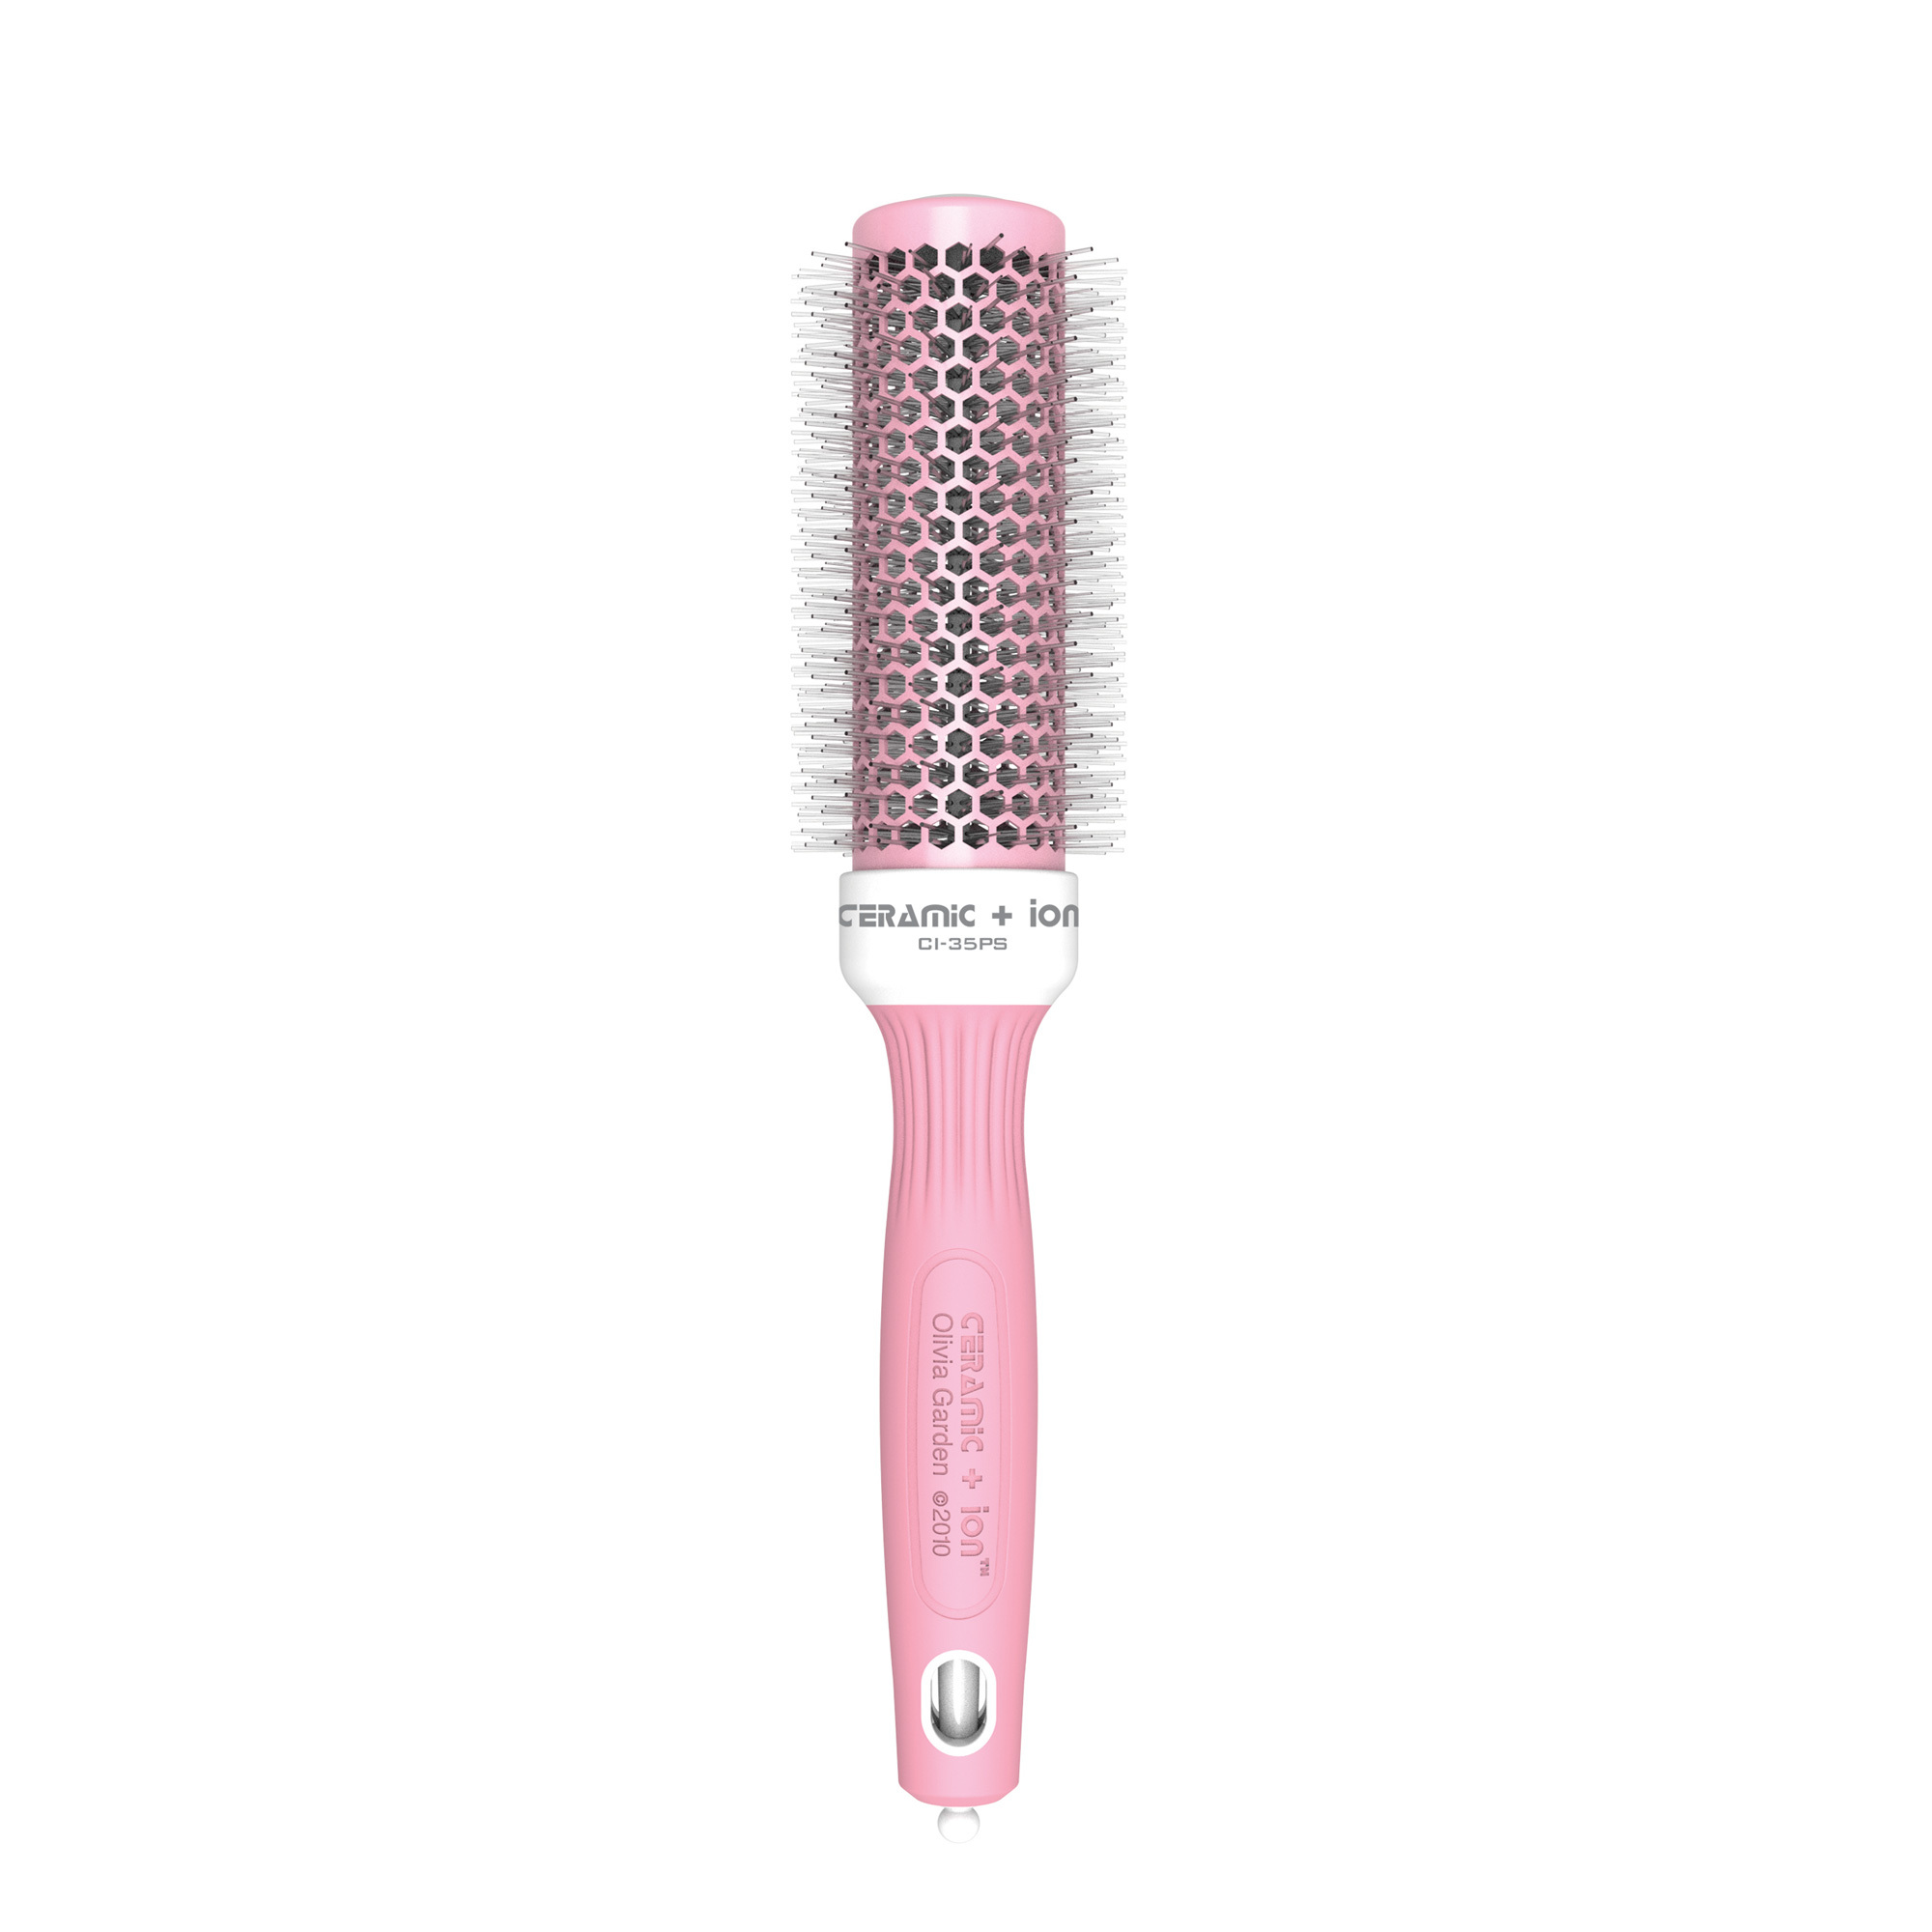 Olivia Garden Pastels Collection: Ceramic + Ion Thermal Round Brush 1-3/8"